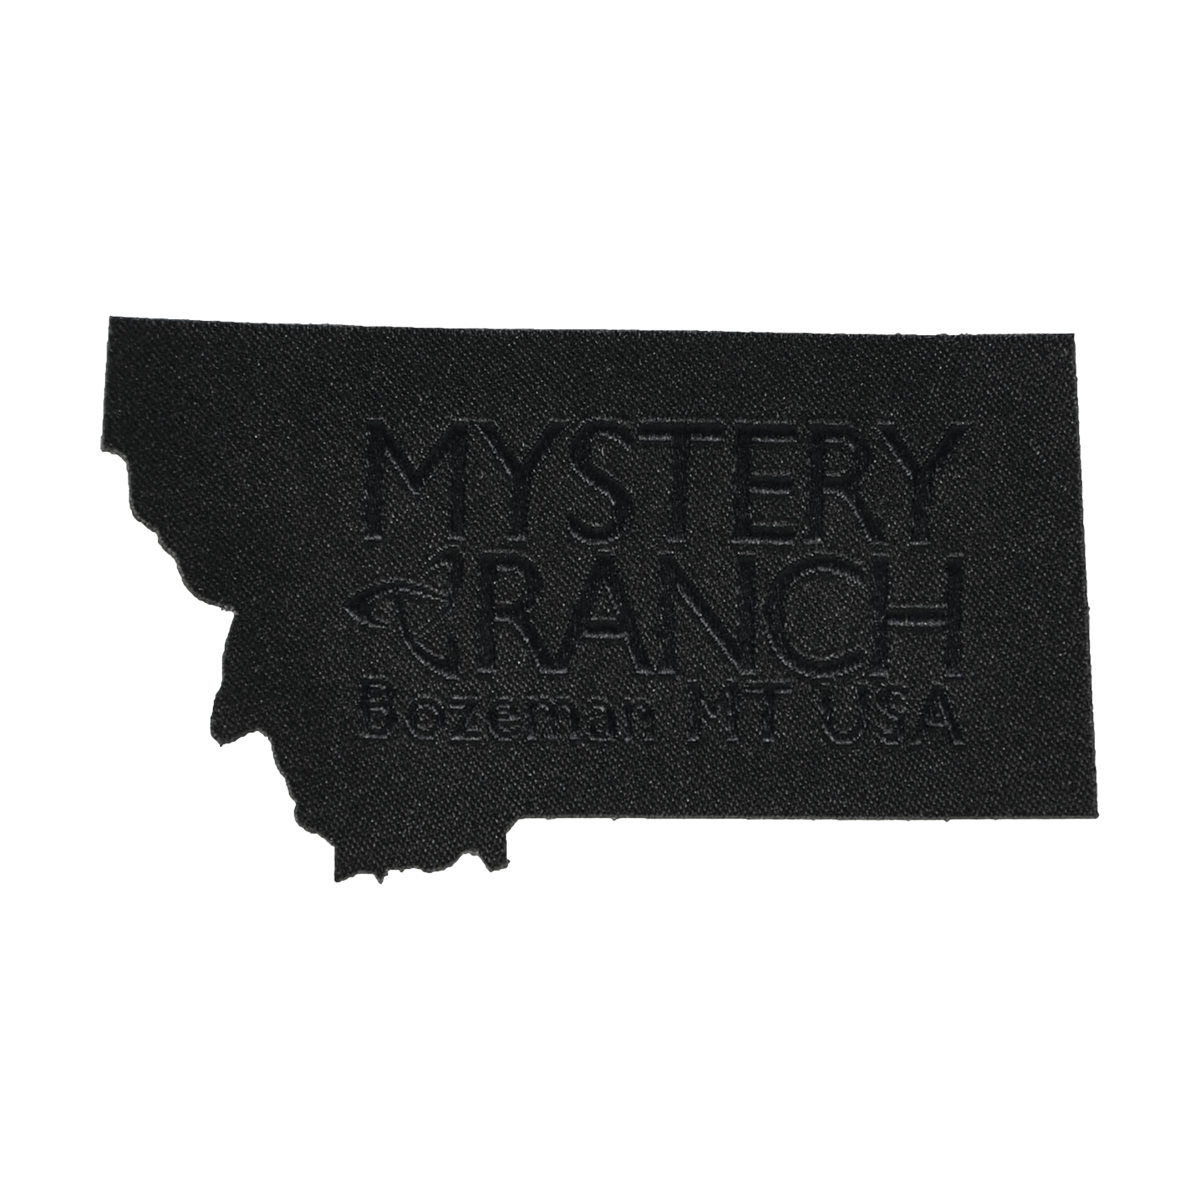 MYSTERY RANCH ROUGH AROUND THE EDGES MORALE PATCH